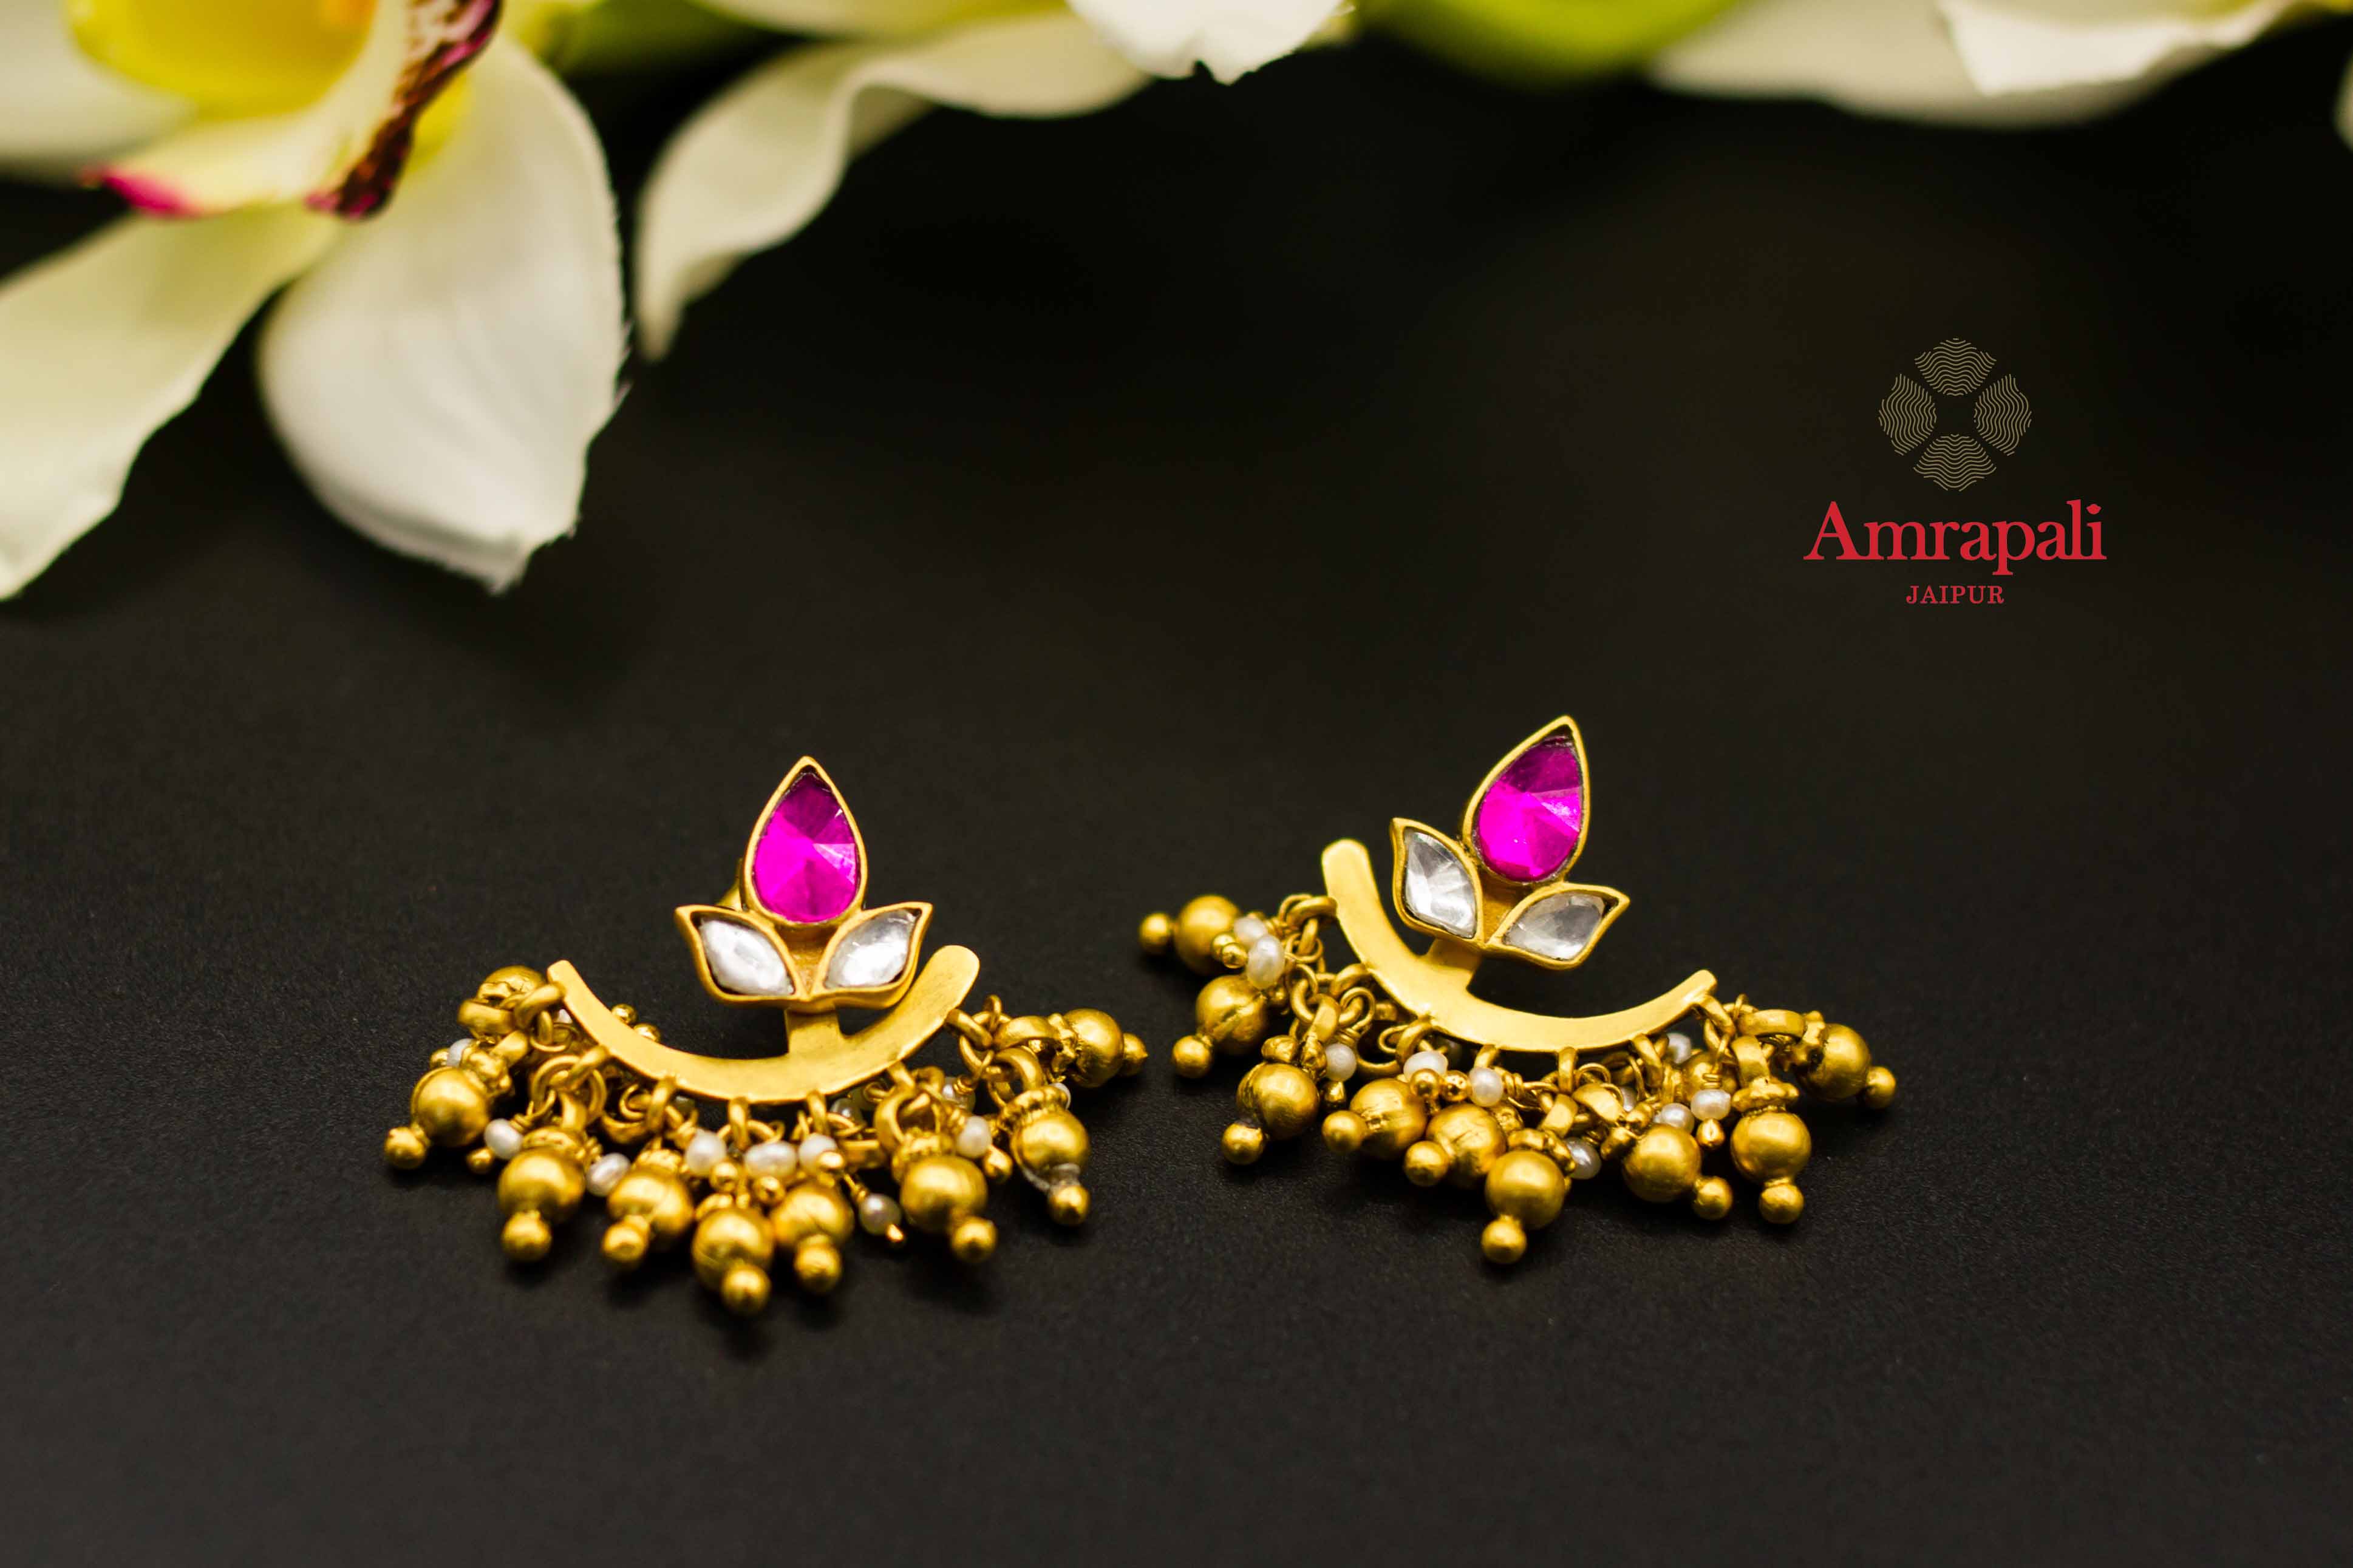 Buy Amrapali silver gold plated glass earrings online in USA with golden beads. Raise your ethnic style quotient on special occasions with exquisite Indian jewelry from Pure Elegance Indian clothing store in USA. Enhance your Indian look with silver gold plated jewelry, necklaces, fashion jewelry available online.-flatlay